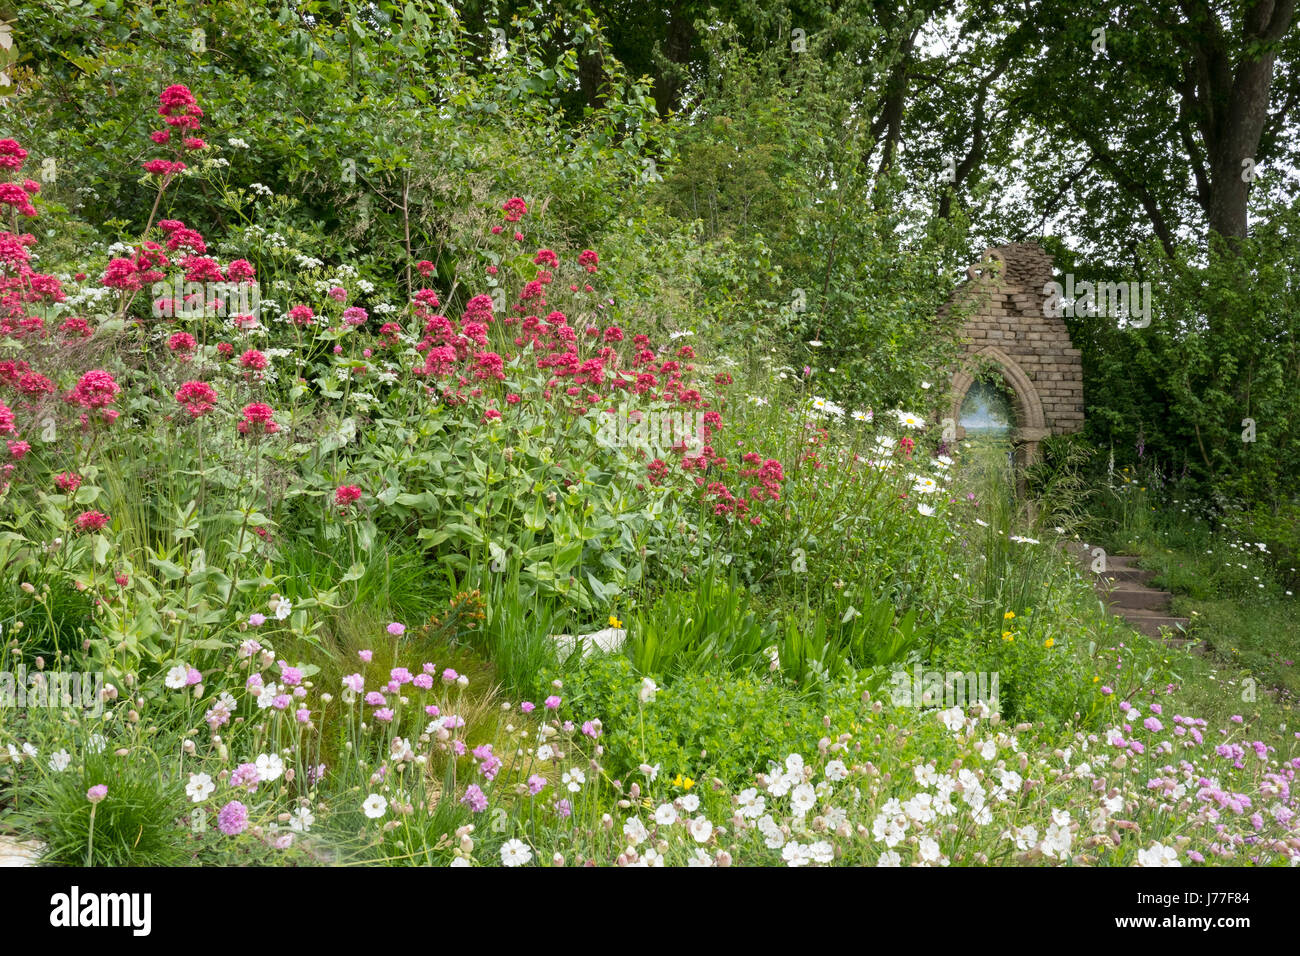 London, UK. 23rd May, 2017. Wild flowers around a ruined abbey in the welcome to Yorkshire Garden at the RHS Chelsea Flower Show, May 22, 2017, London, UK Credit: Ellen Rooney/Alamy Live News Stock Photo